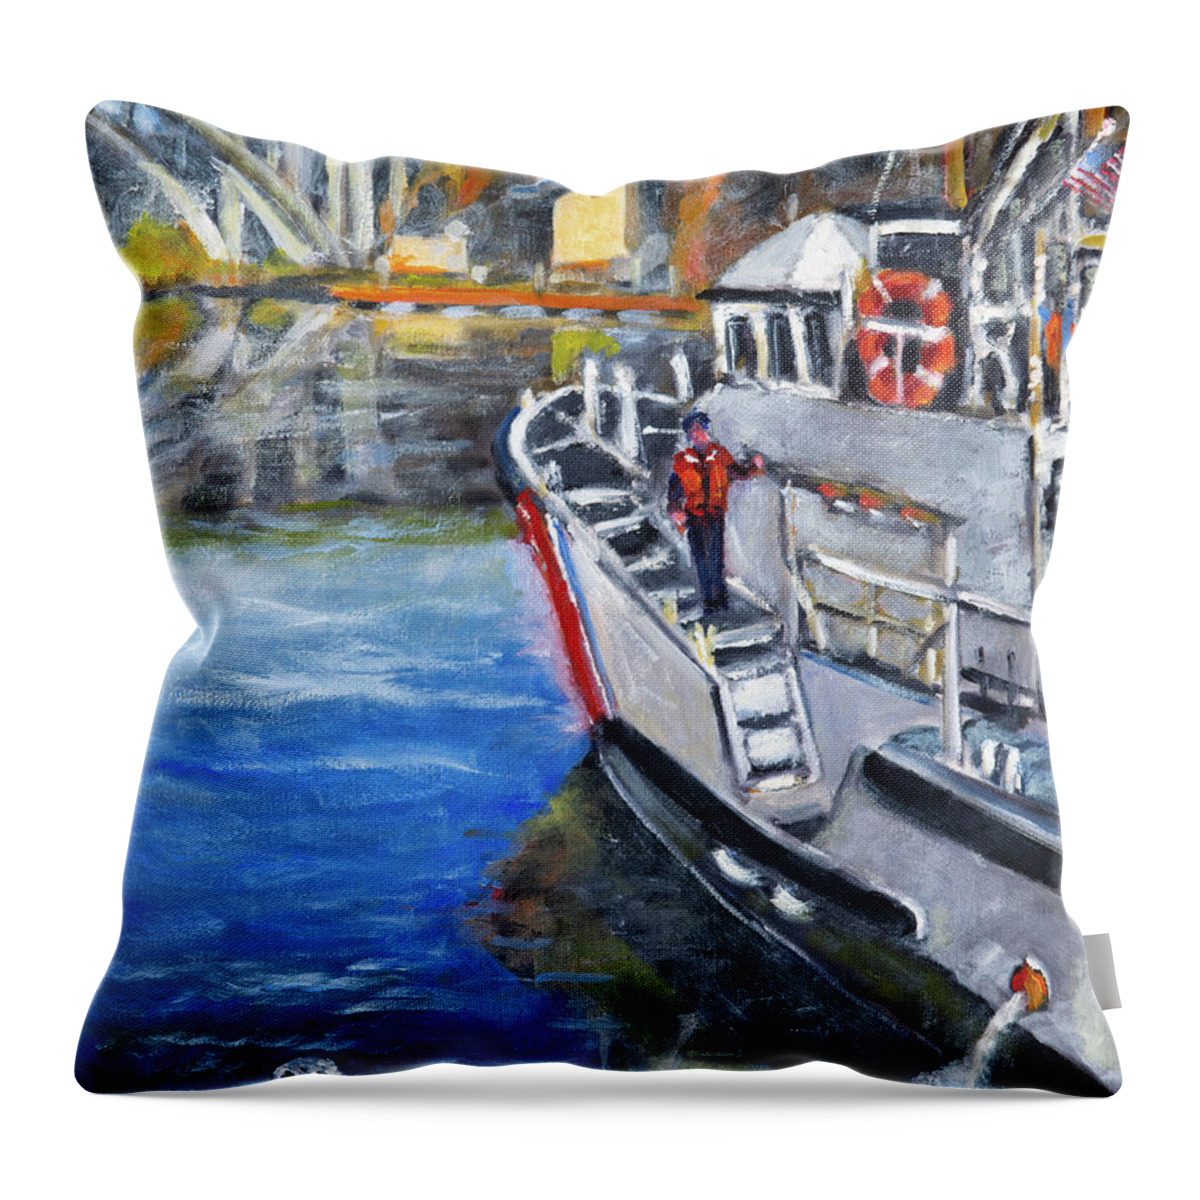 Coast Guard Boat Throw Pillow featuring the painting Coast Guard Boat at Depoe Bay by Mike Bergen